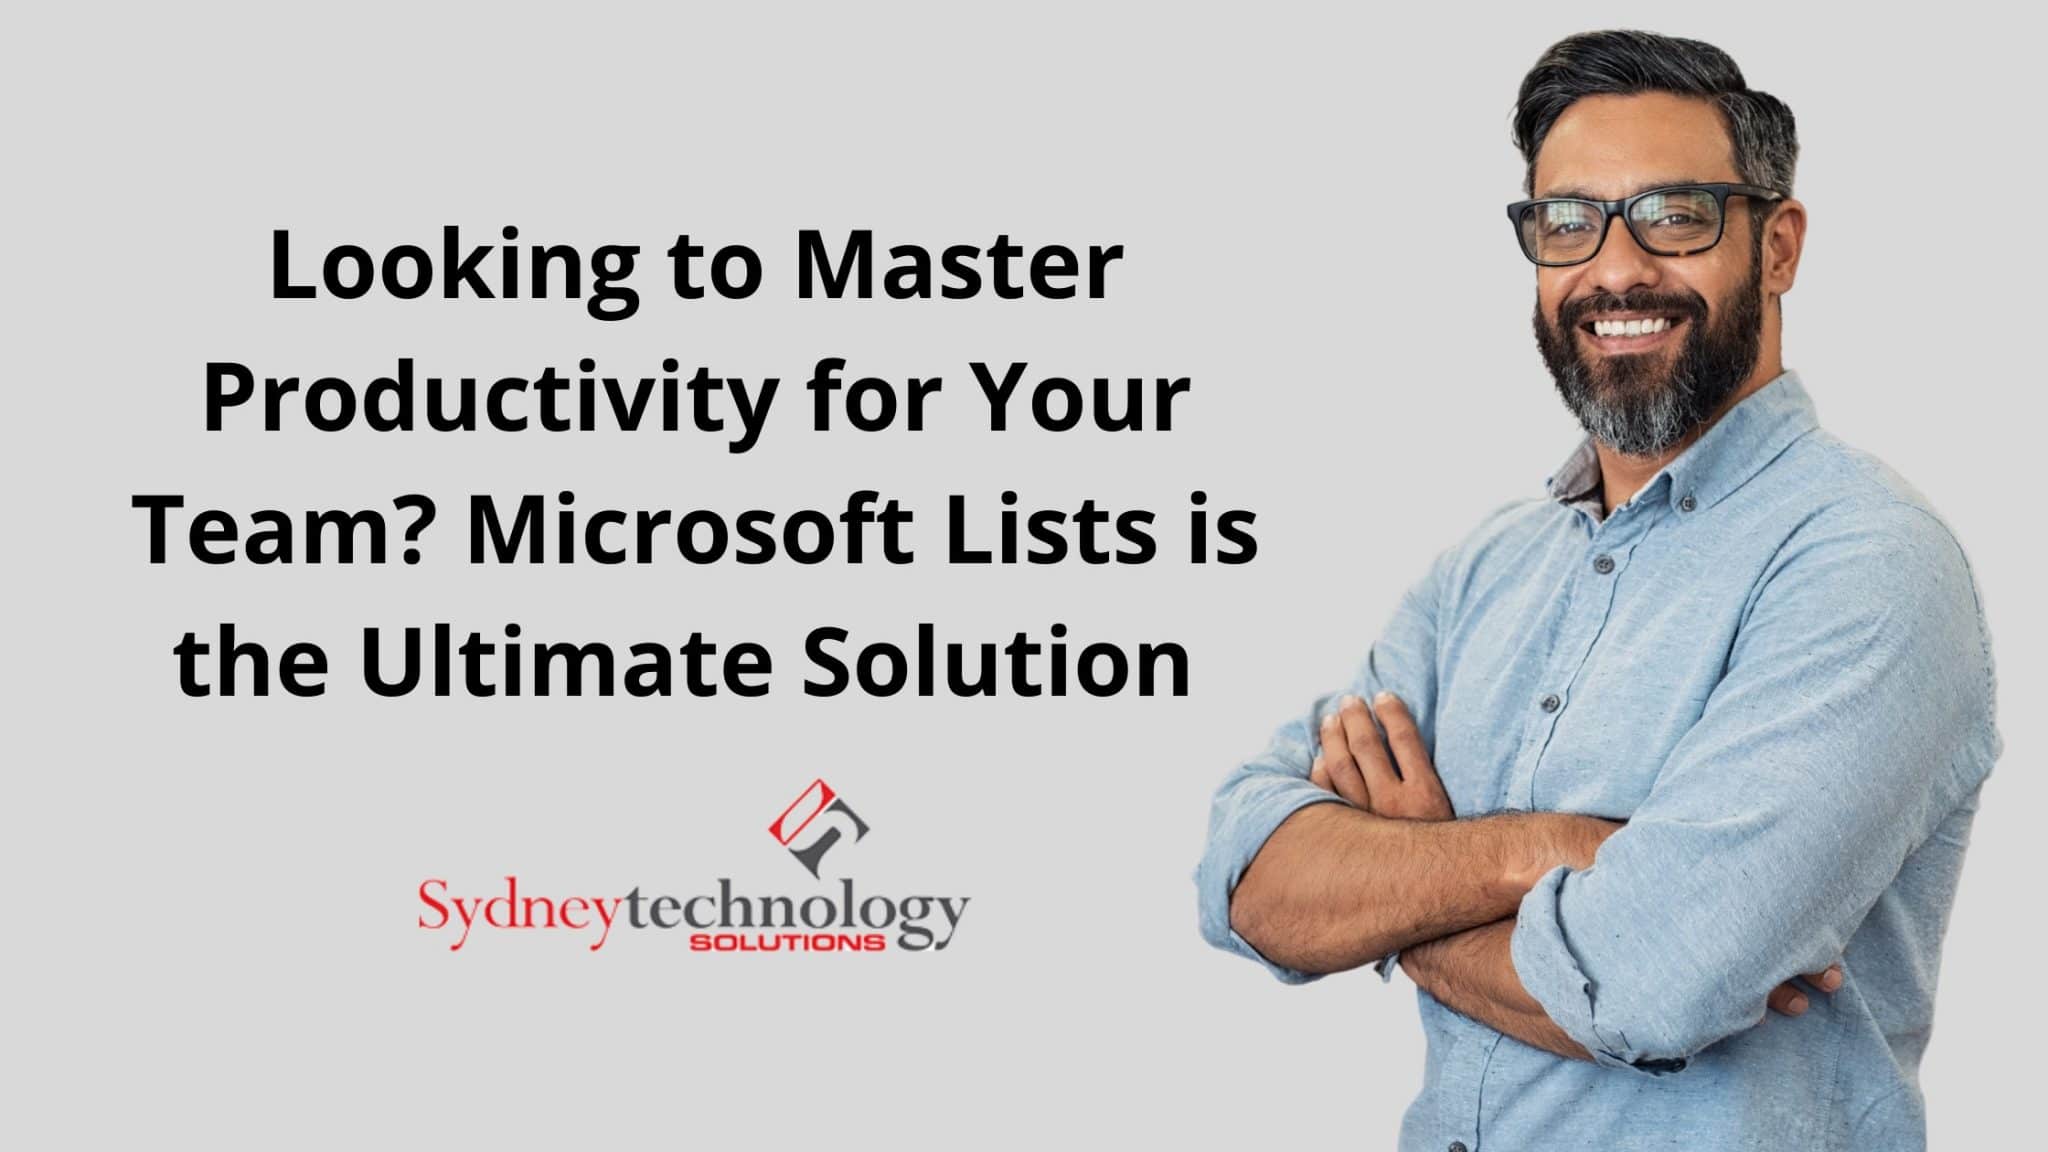 Looking to Master Productivity for Your Team? Microsoft Lists is the Ultimate Solution 